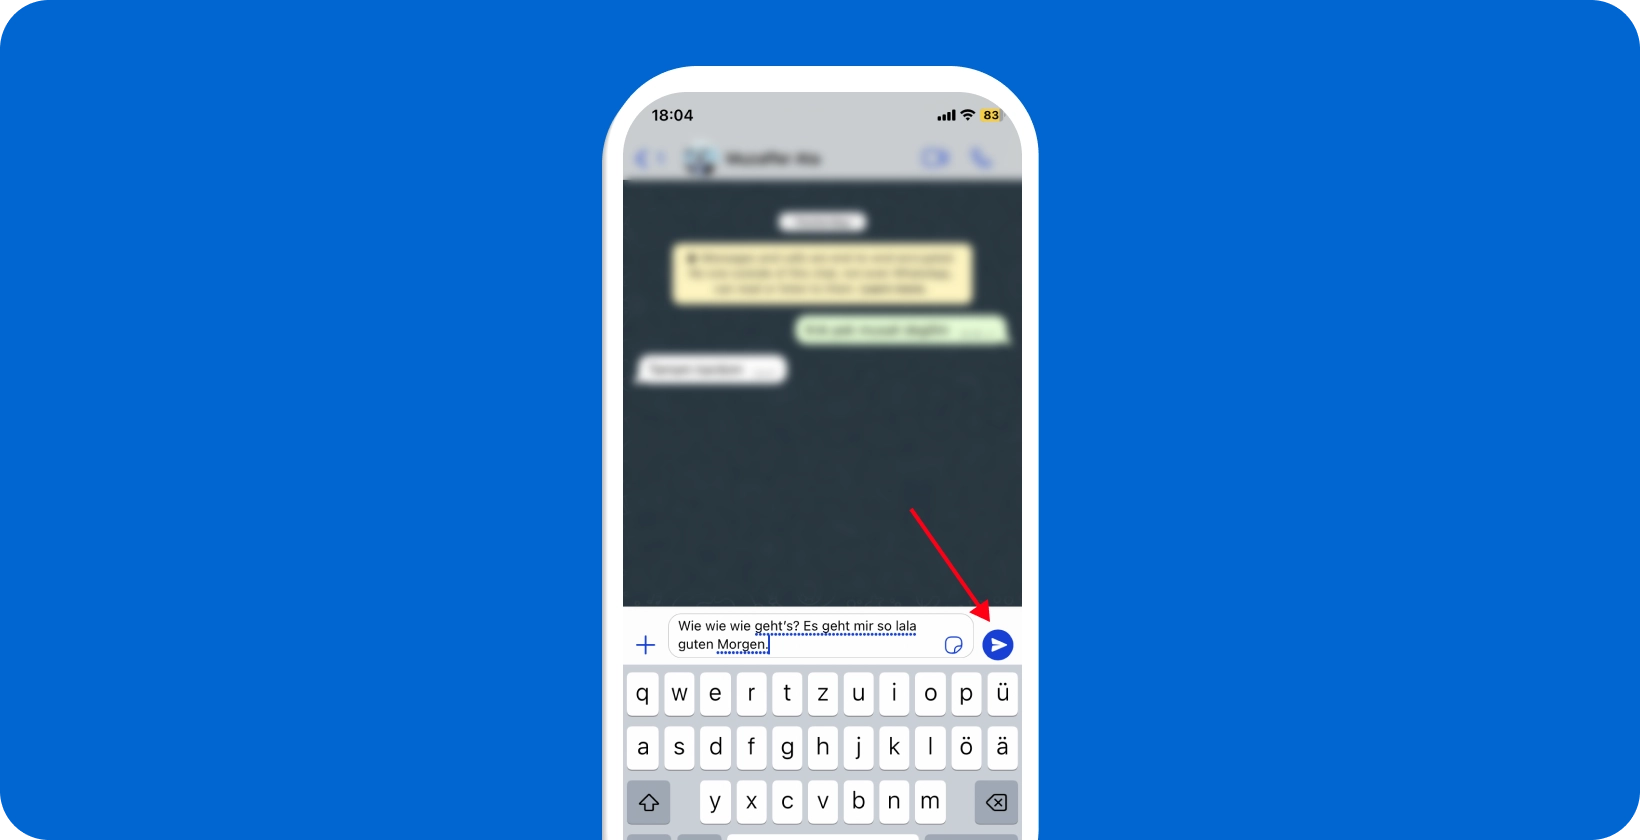 Smartphone screen showing WhatsApp's voice dictation feature being used, with a microphone icon highlighted.